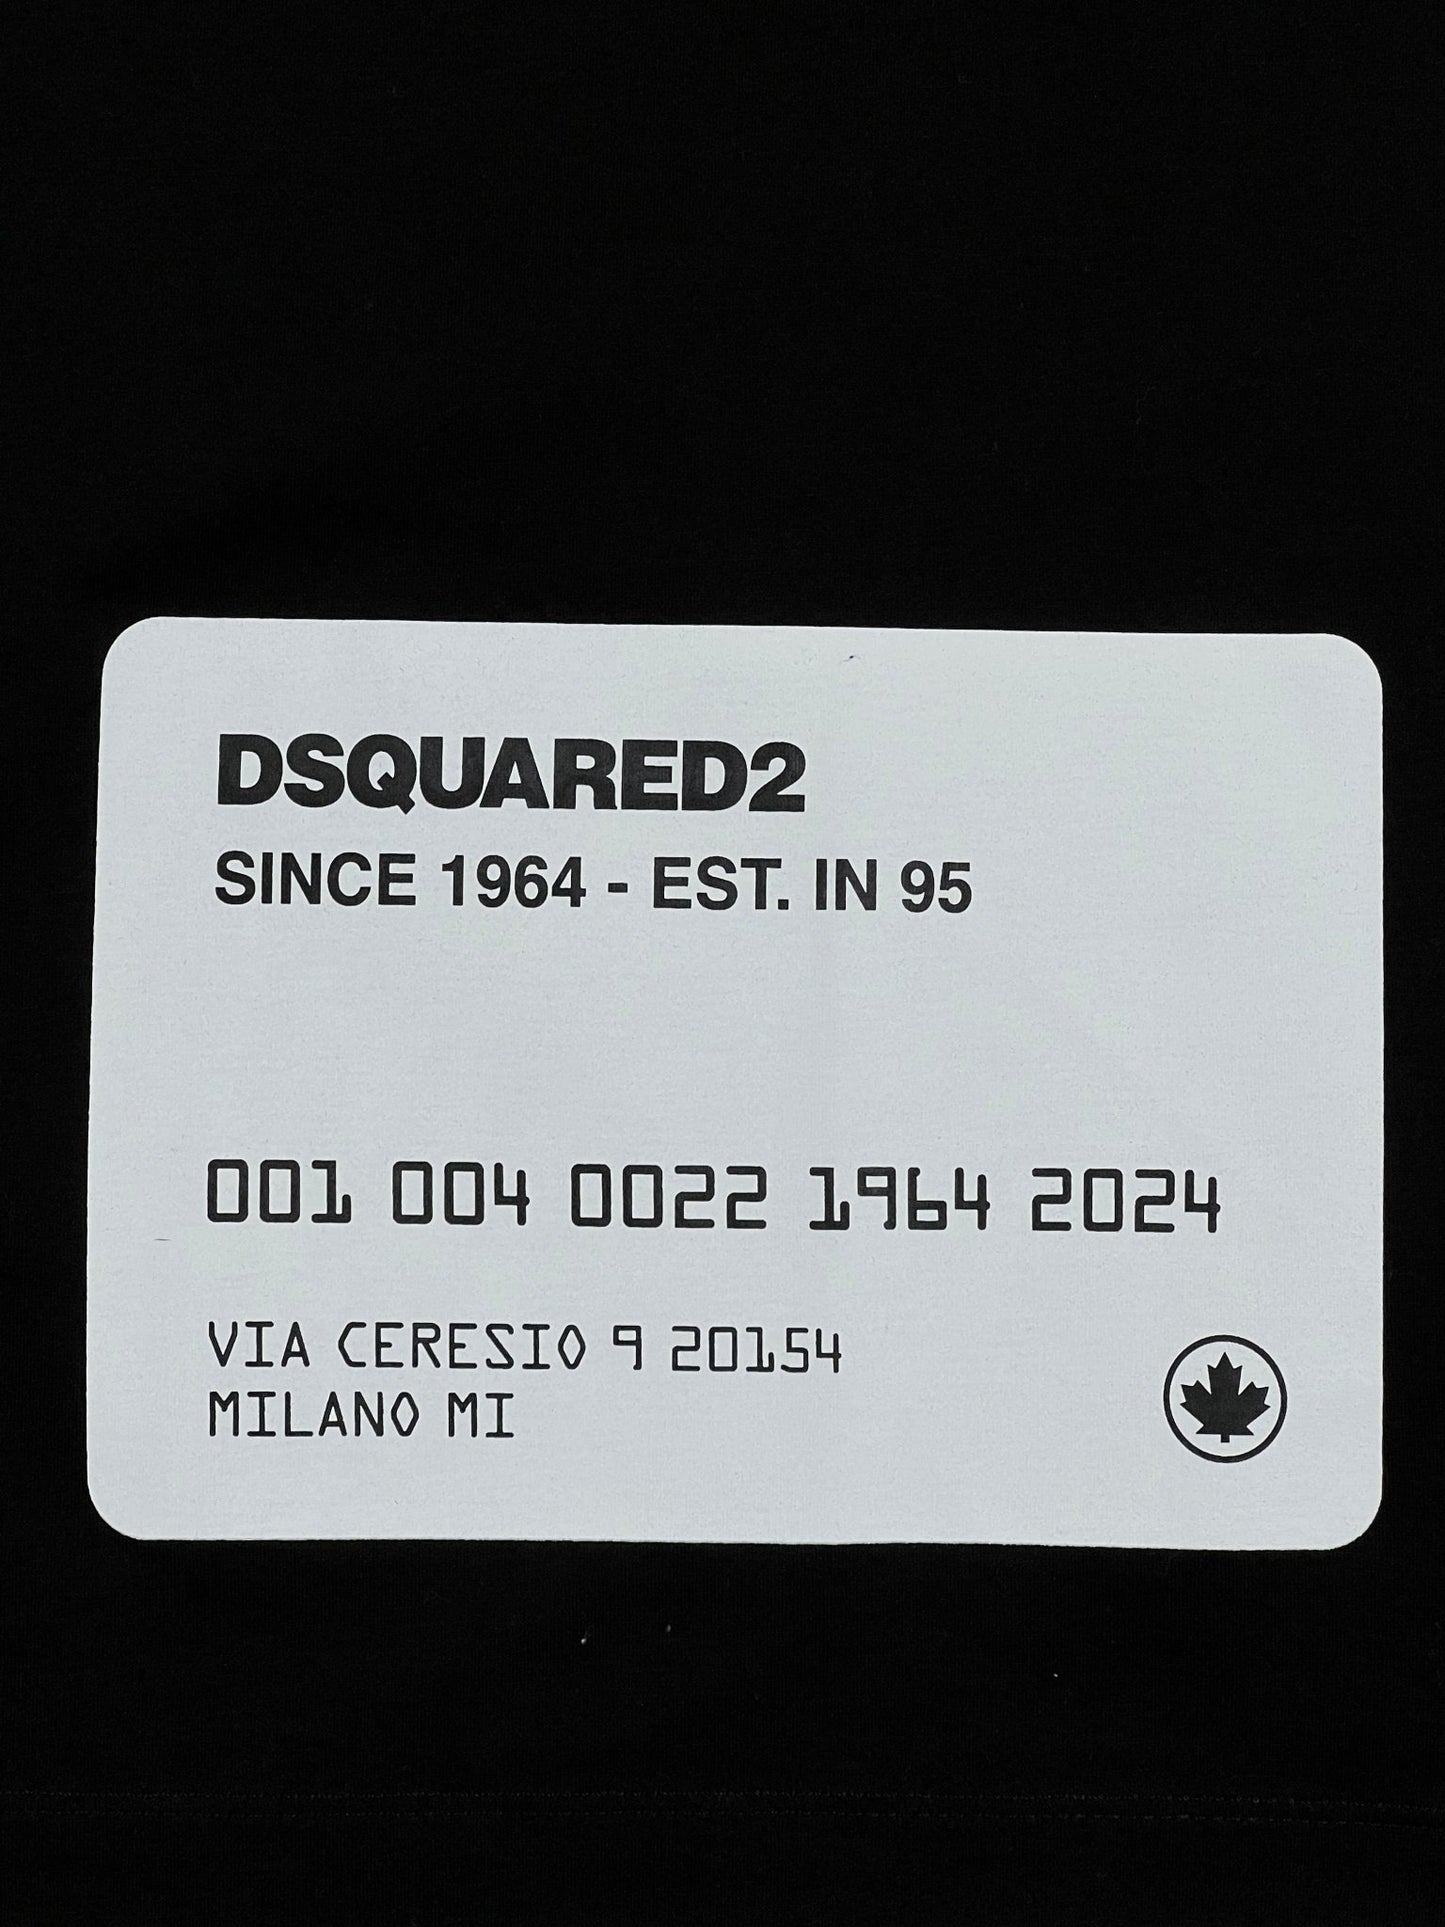 Probus DSQUARED2 T SHIRT S74GD1237 LOOSE FIT TEE BLACK DSQUARED2 T SHIRT S74GD1237 LOOSE FIT TEE BLACK S